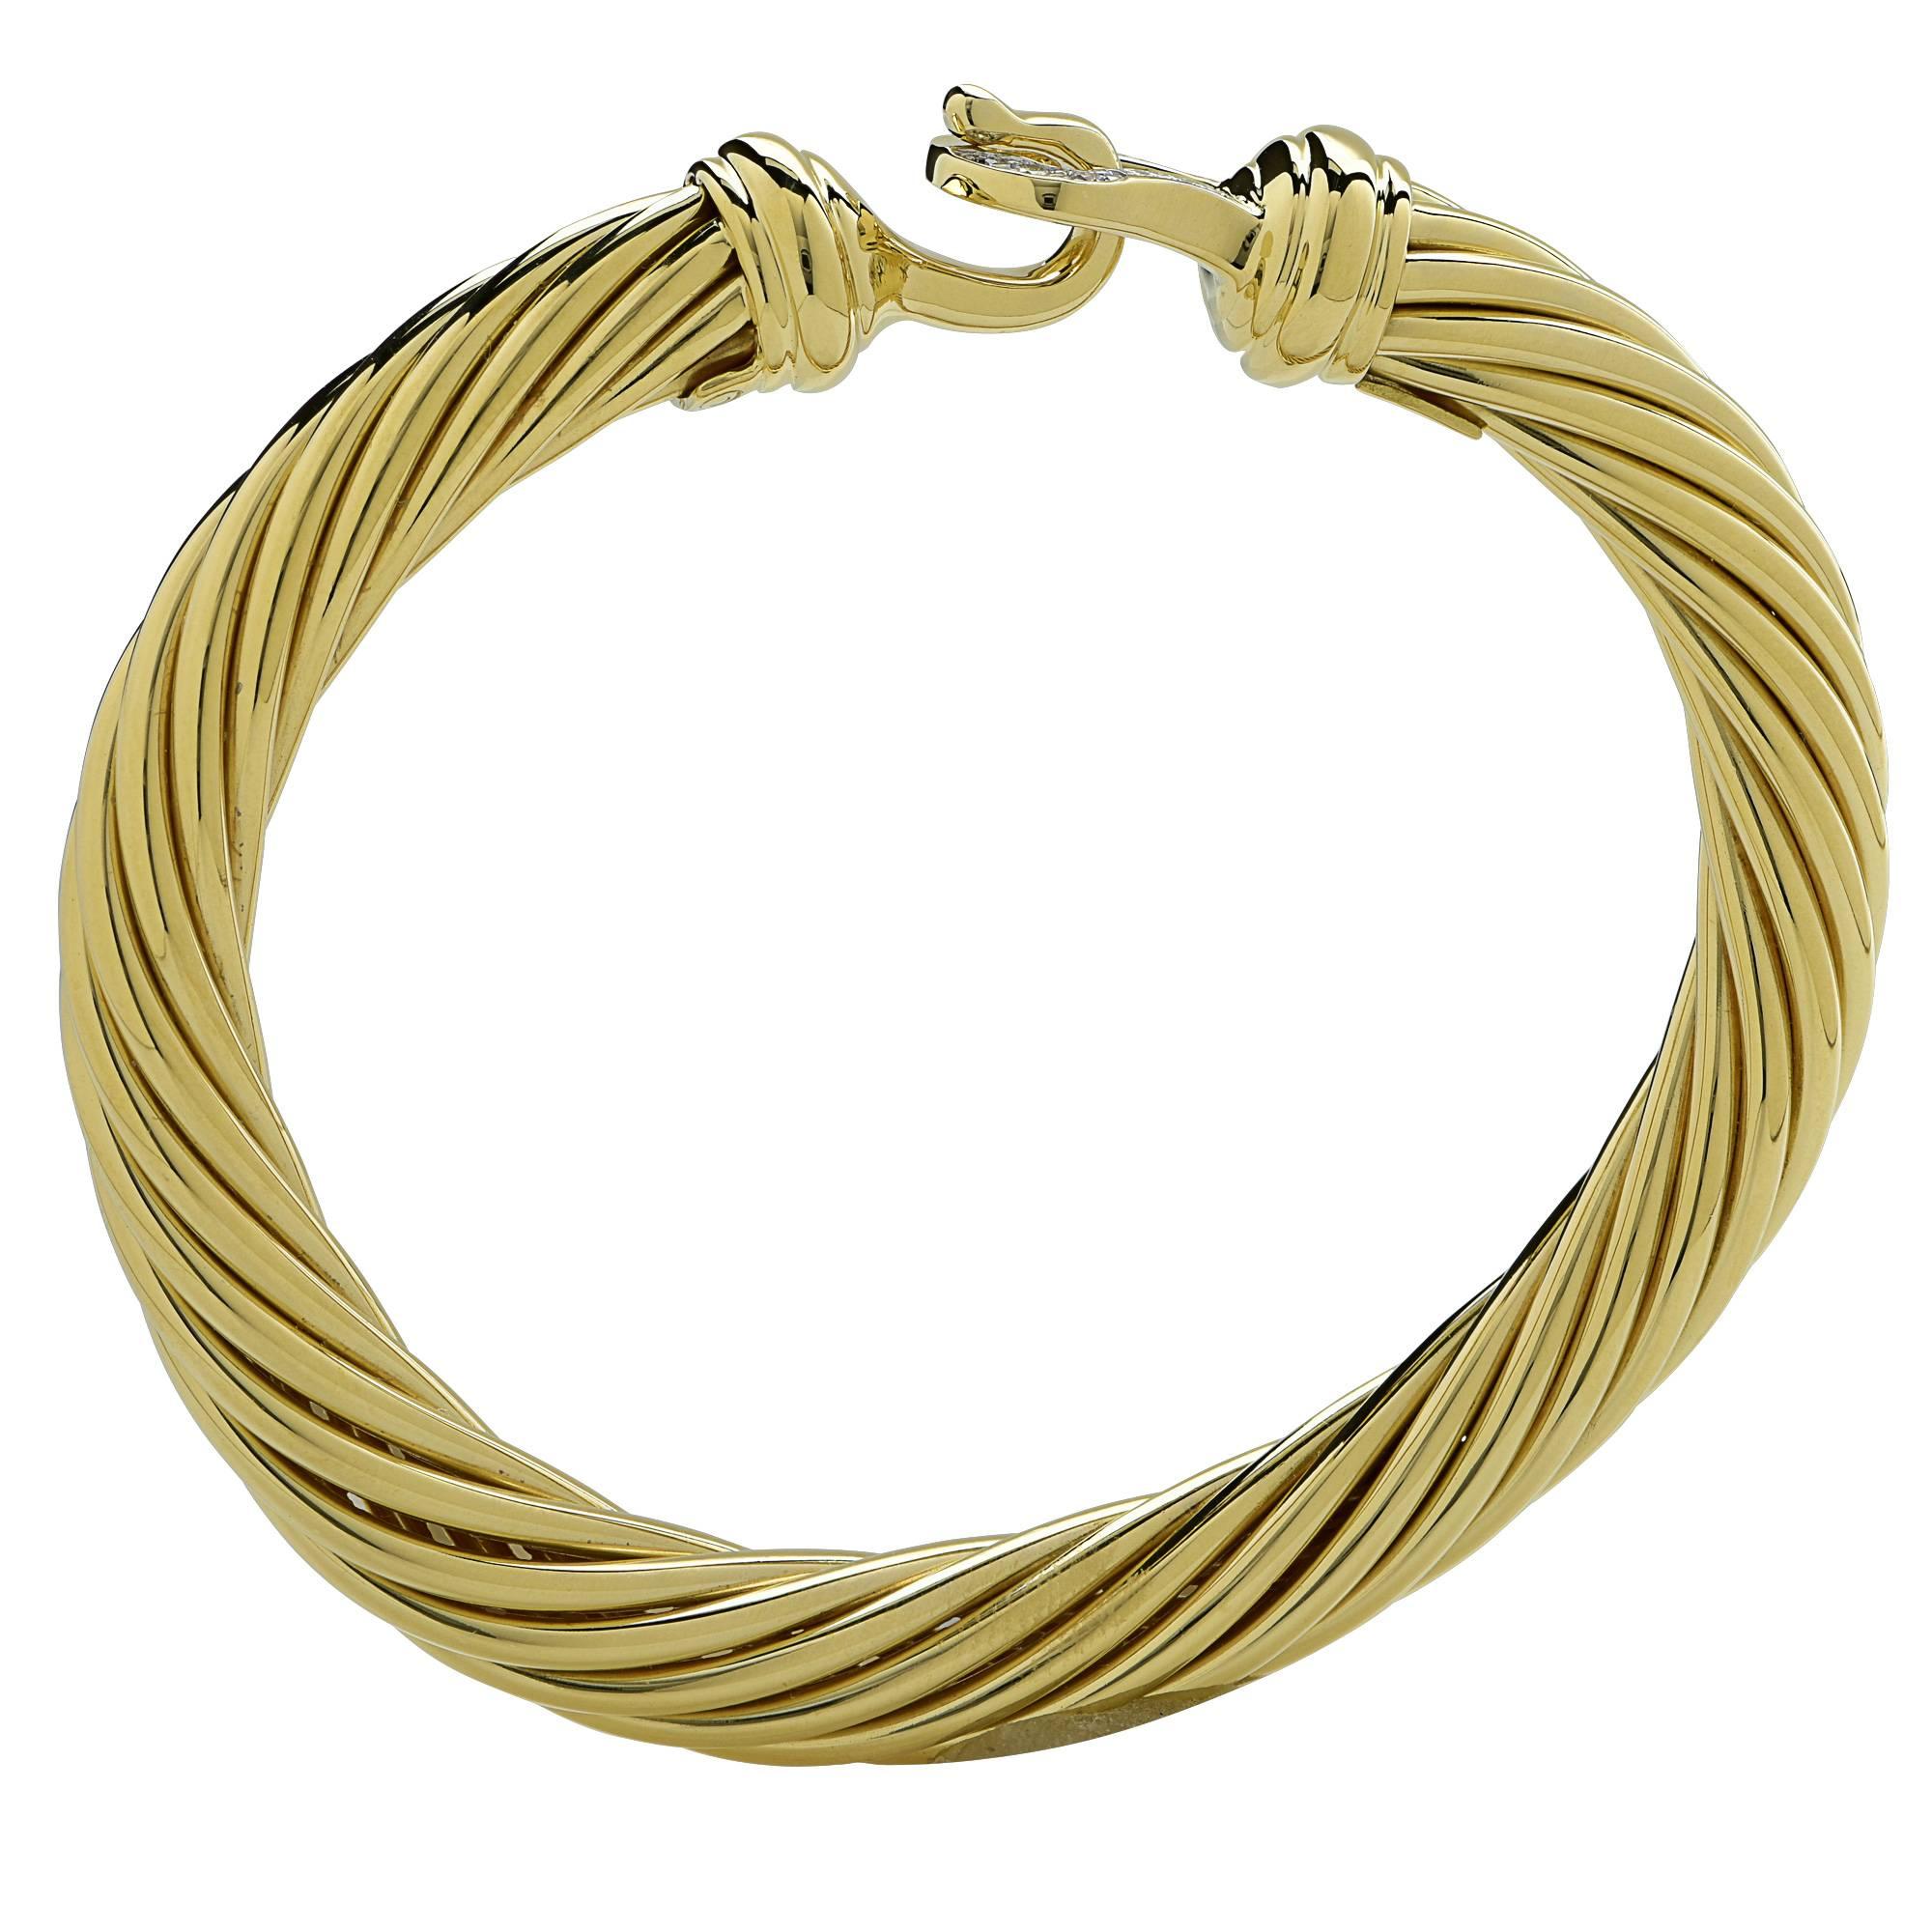 18 Karat Yellow Gold Diamond David Yurman Bangle.

Weight: 24.25 grams

This Bracelet is Accompanied by a Retail Appraisal Performed by an Accredited Gemologist.